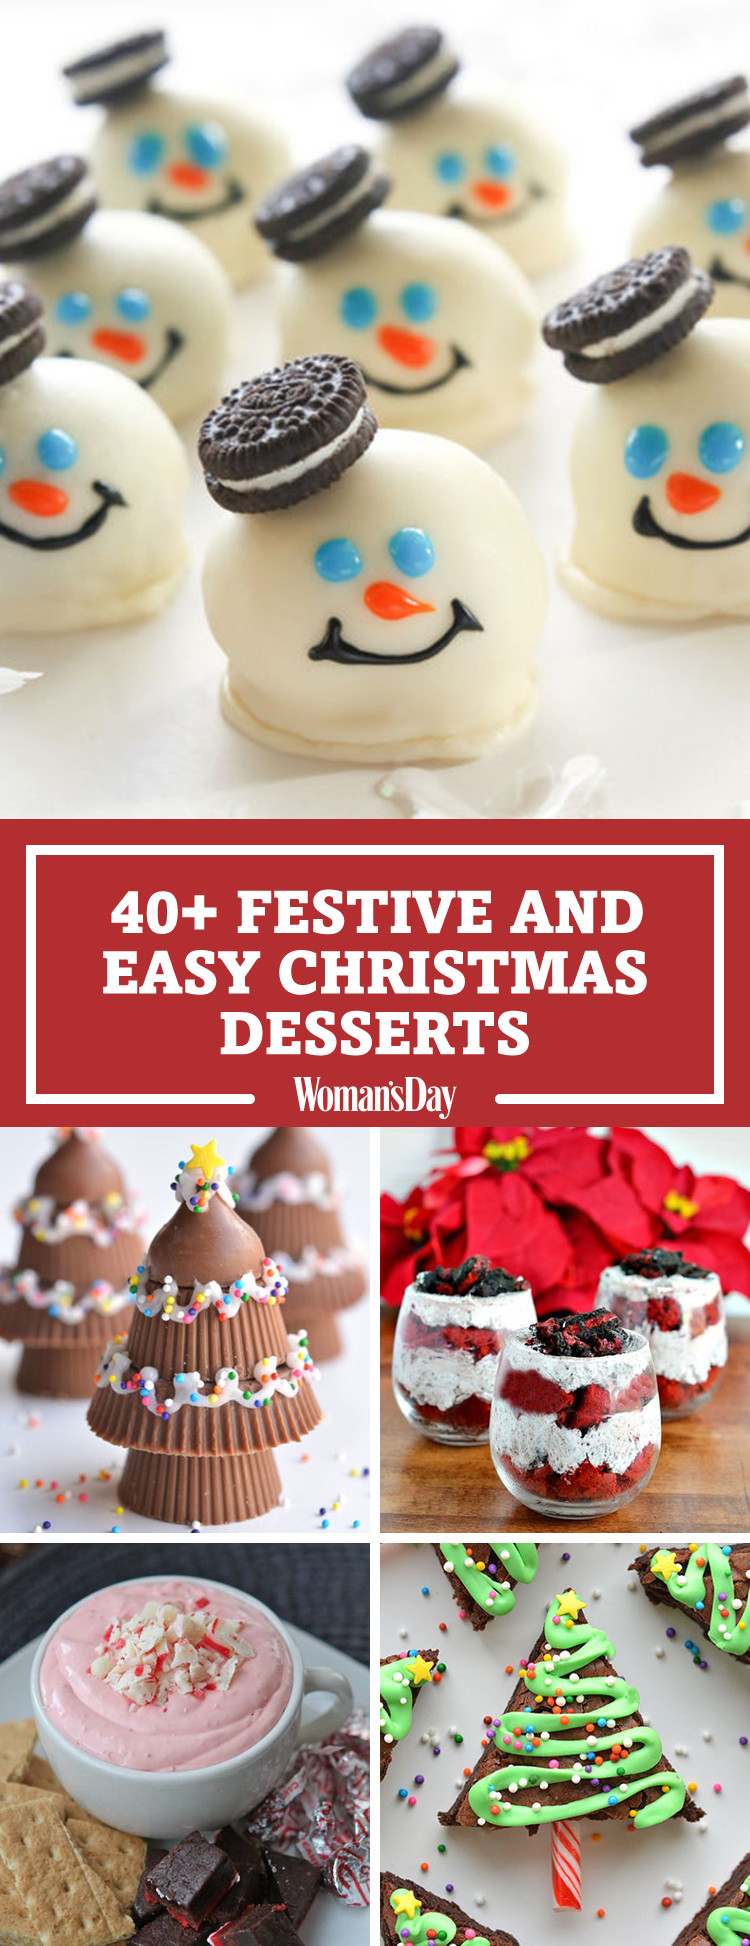 Pictures Of Christmas Desserts
 57 Easy Christmas Dessert Recipes Best Ideas for Fun